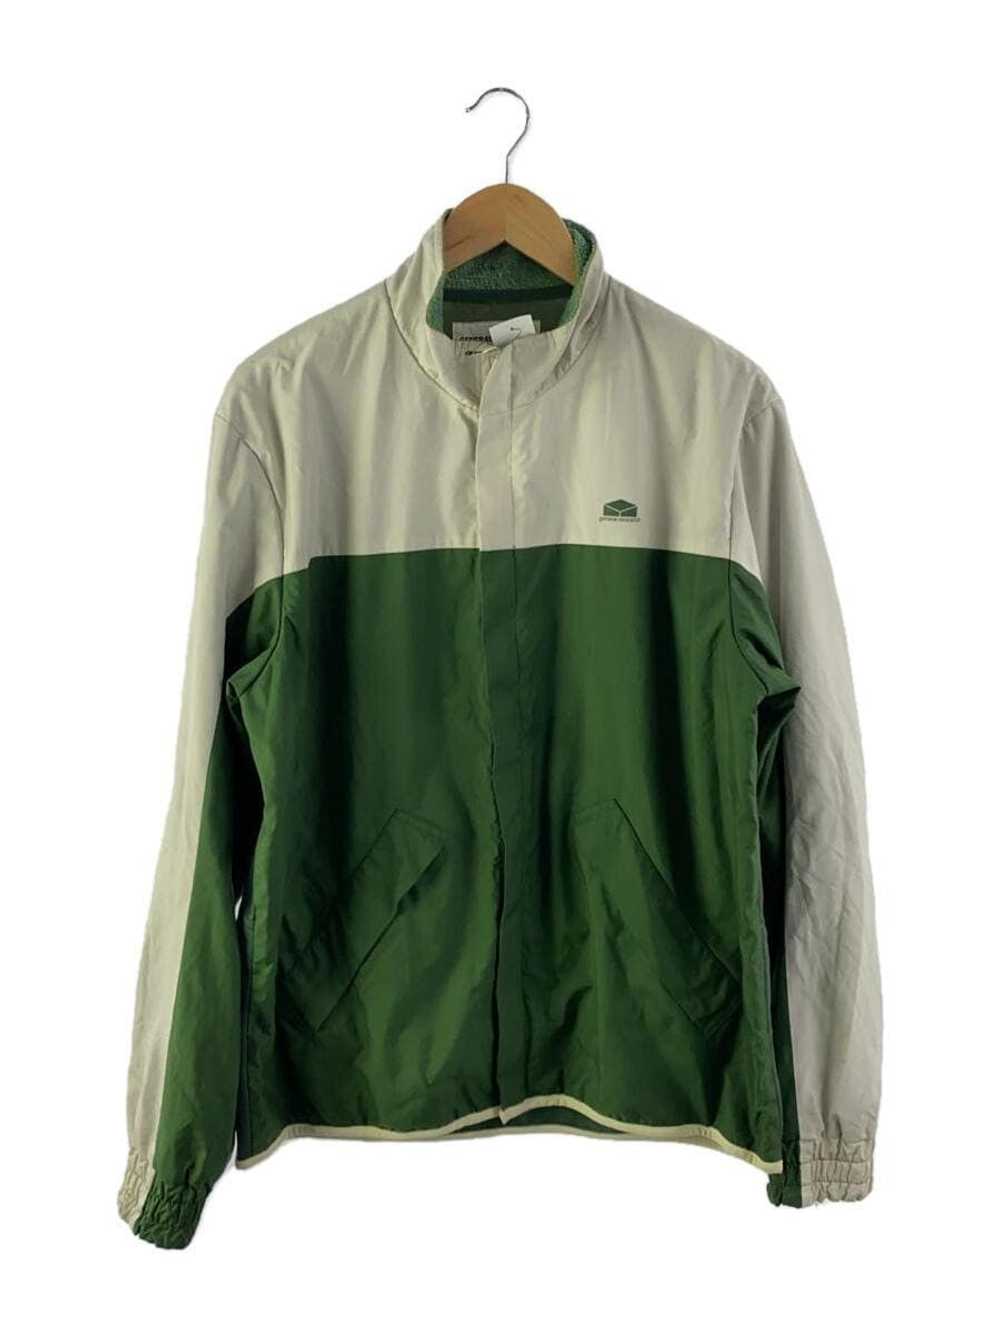 General Research 🐎 2001 2 Tone Jacket - image 1